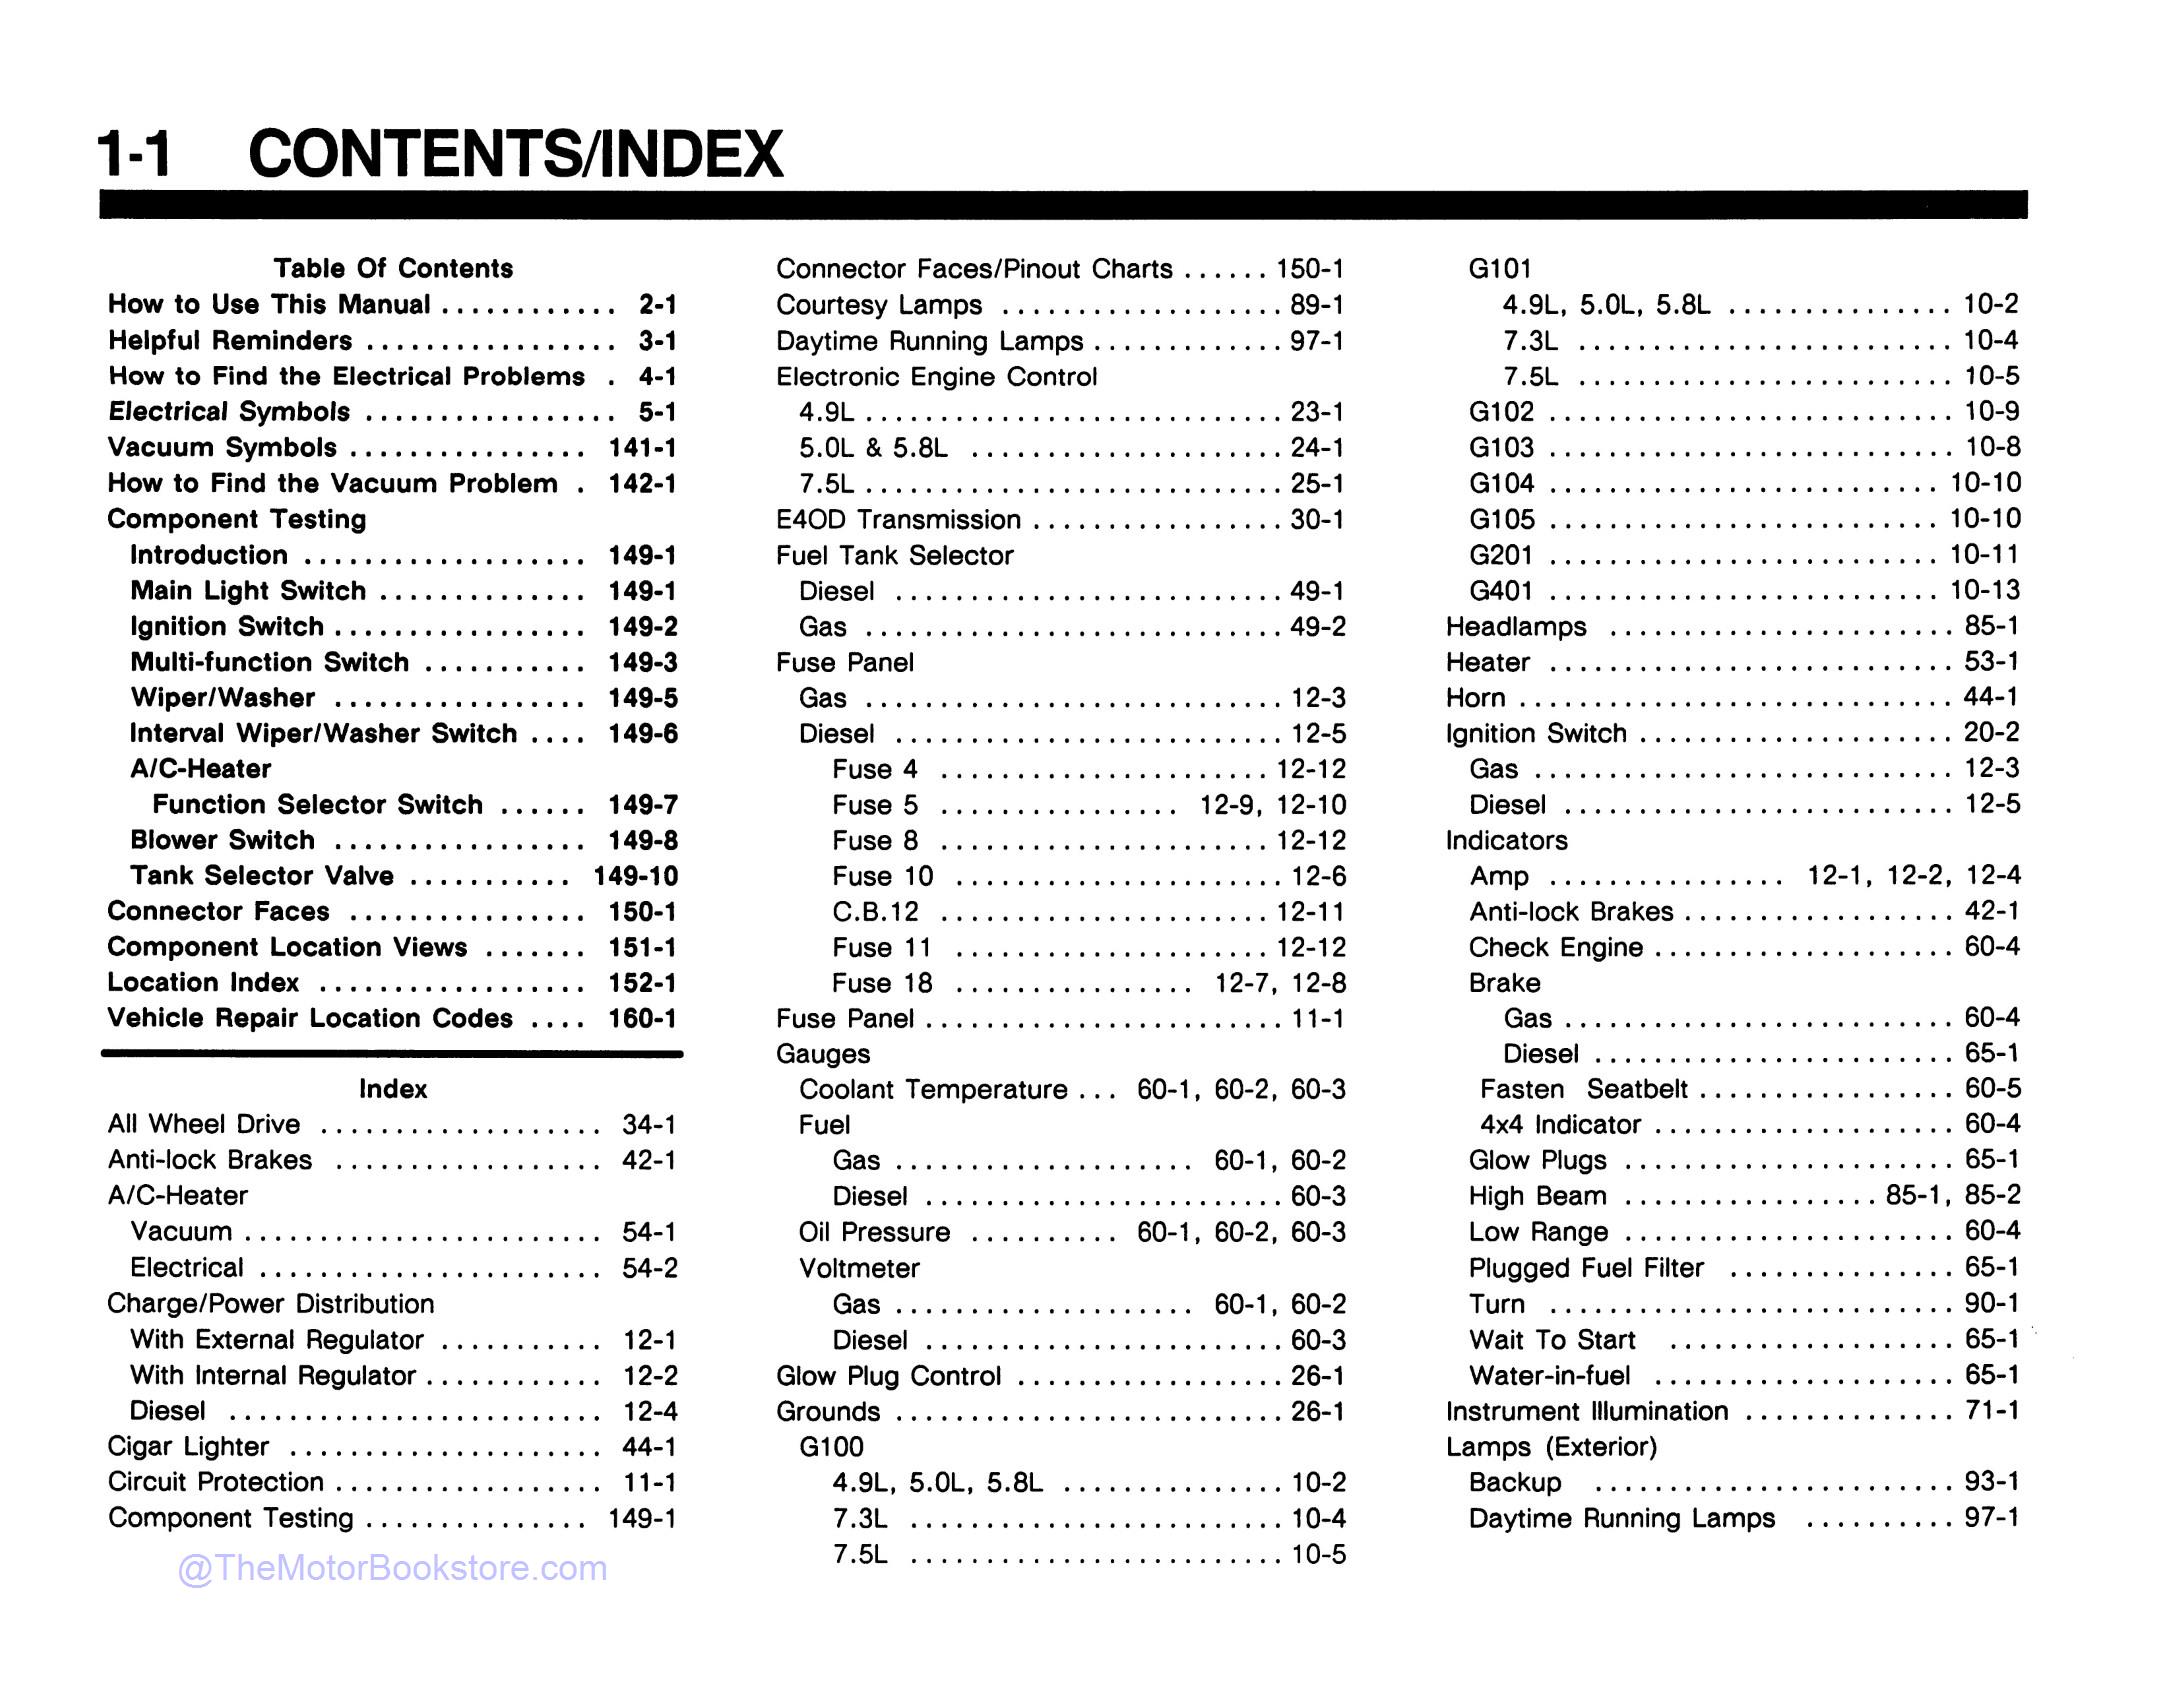 1990 Ford F-Series Truck & Bronco Electrical Vacuum Manual  - Table of Contents 1